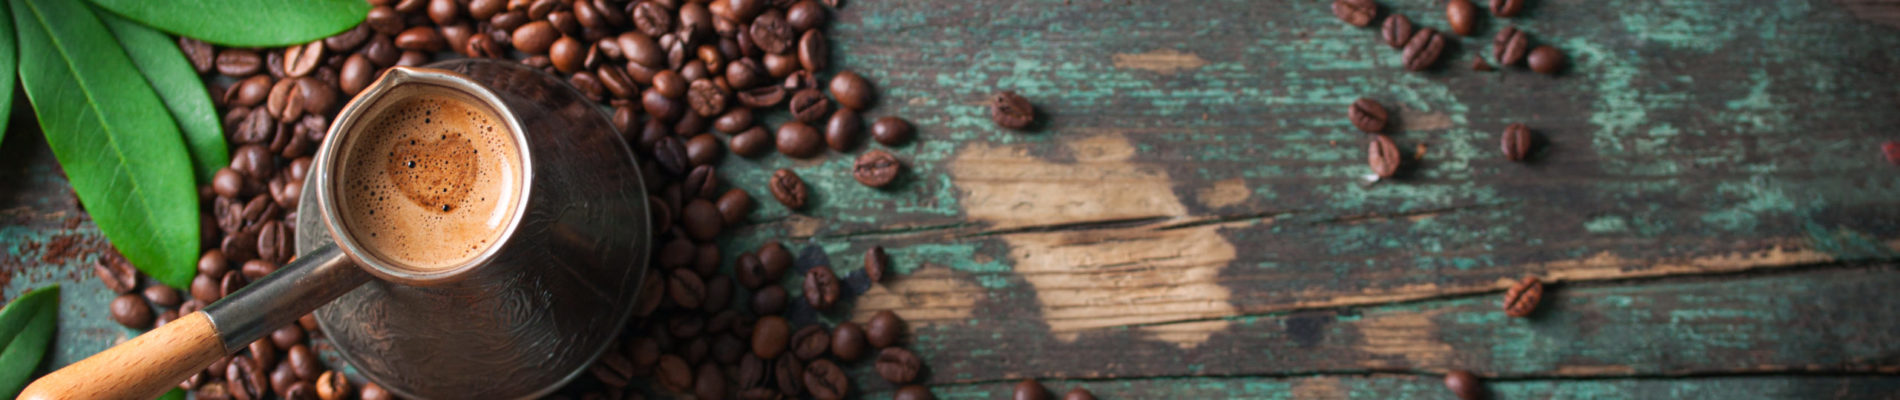 Hot coffee in a coffeepot or turk on a wooden background with coffee leaves and beans, horizontal with copy space. Top view